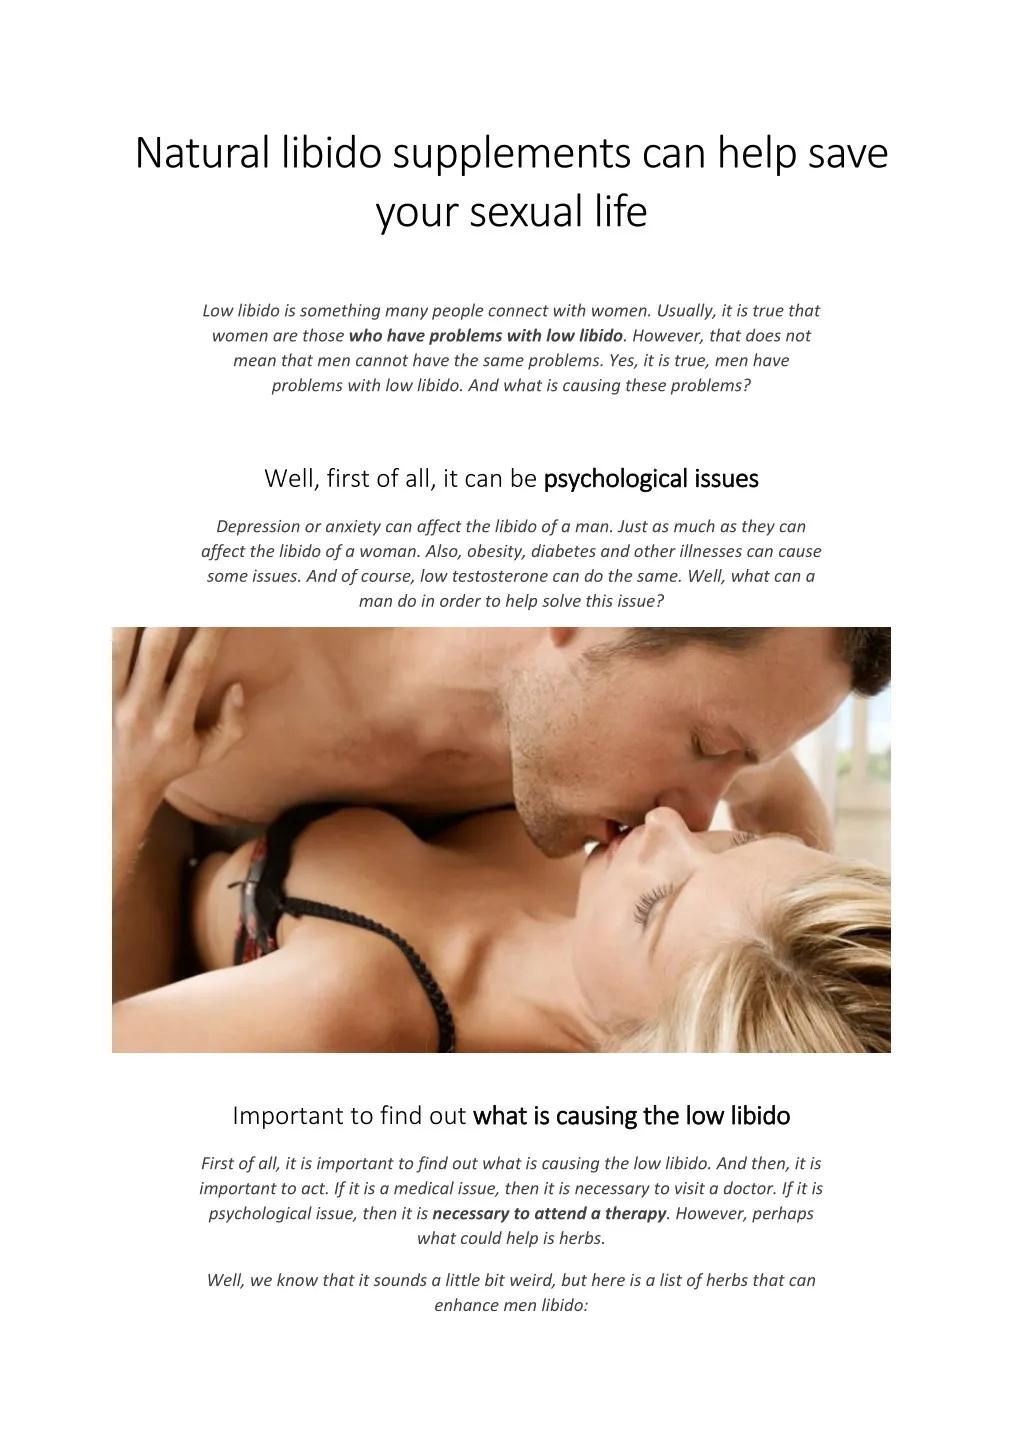 natural libido supplements can help save your